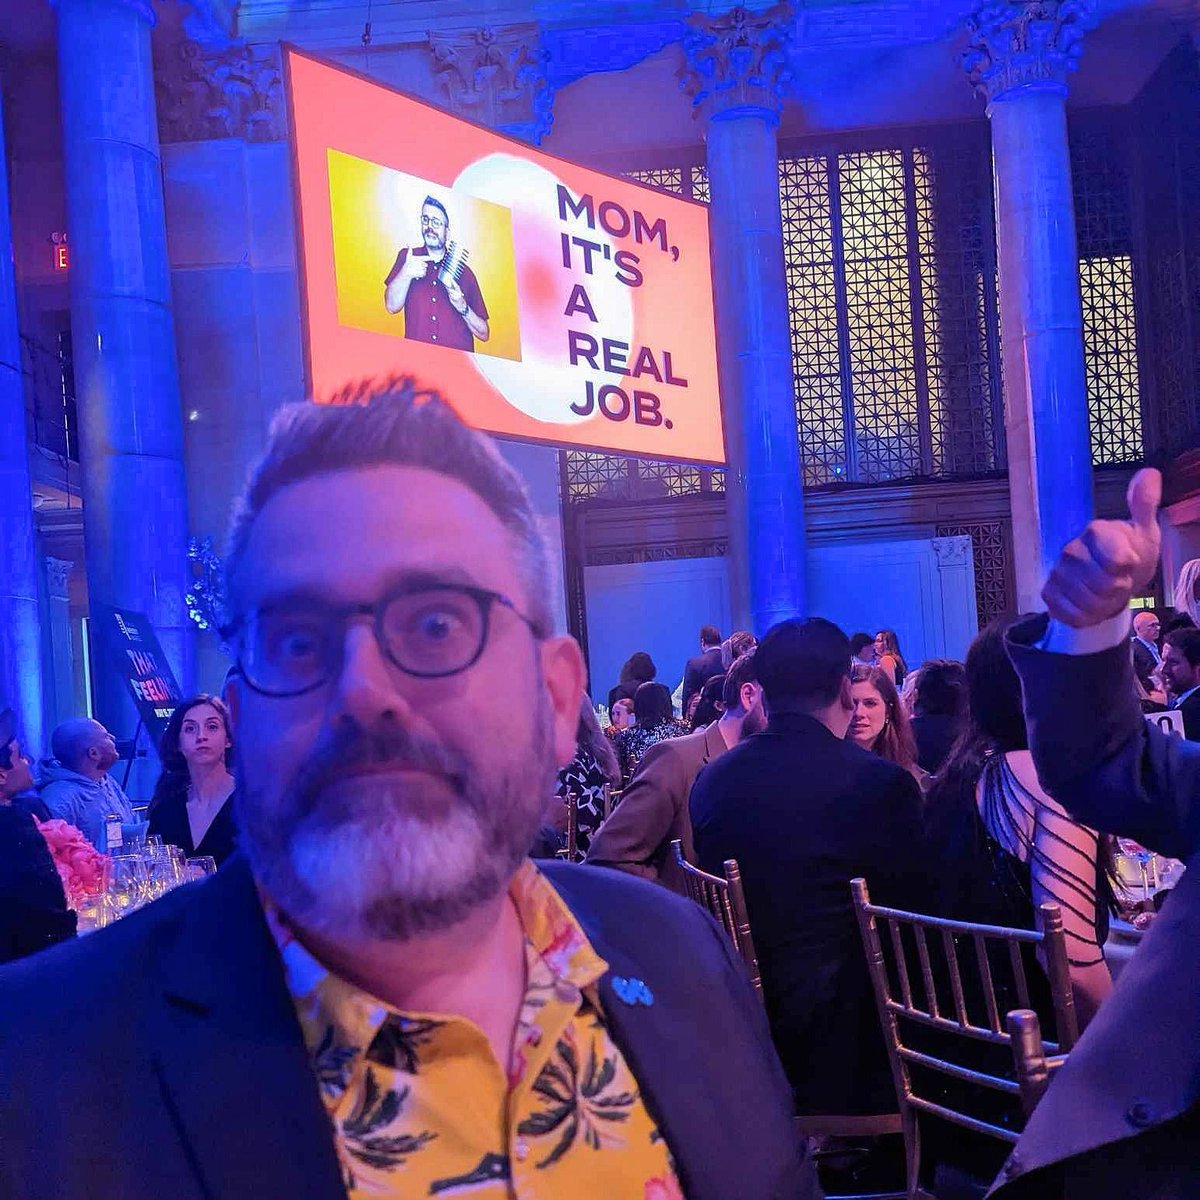 I won another Webby Award, and the acceptance speech must be exactly 5 words long.
Today is #5WordSpeech crowdsourcing day. Last year I said, 'Mom, it's a real job.' What should I say this year?